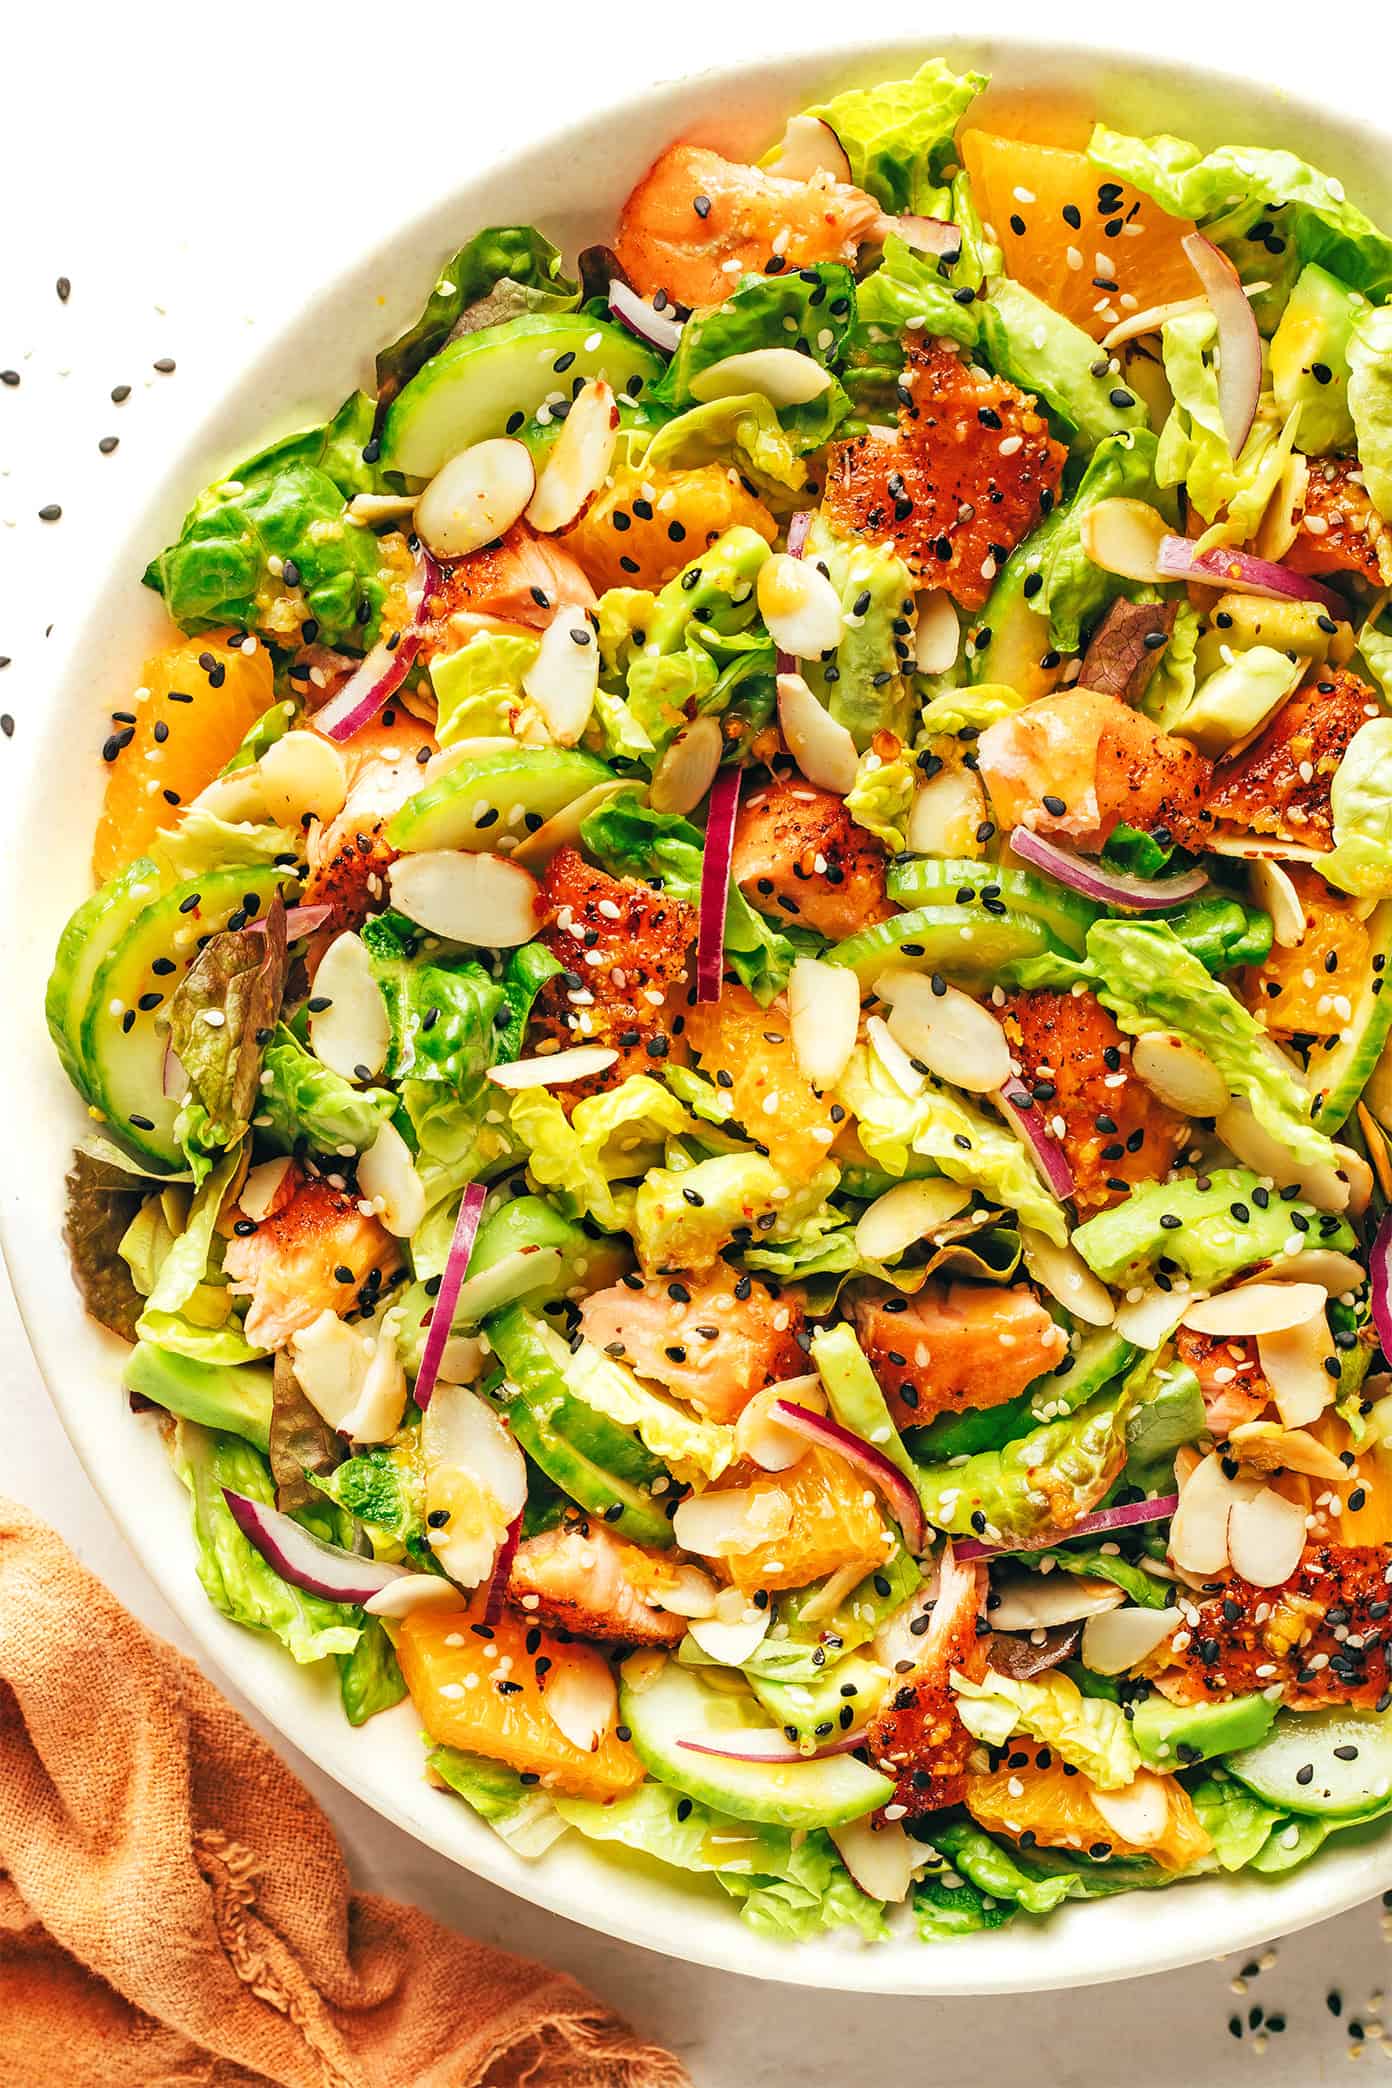 Orange salmon salad with avocado and toasted almonds in serving bowl